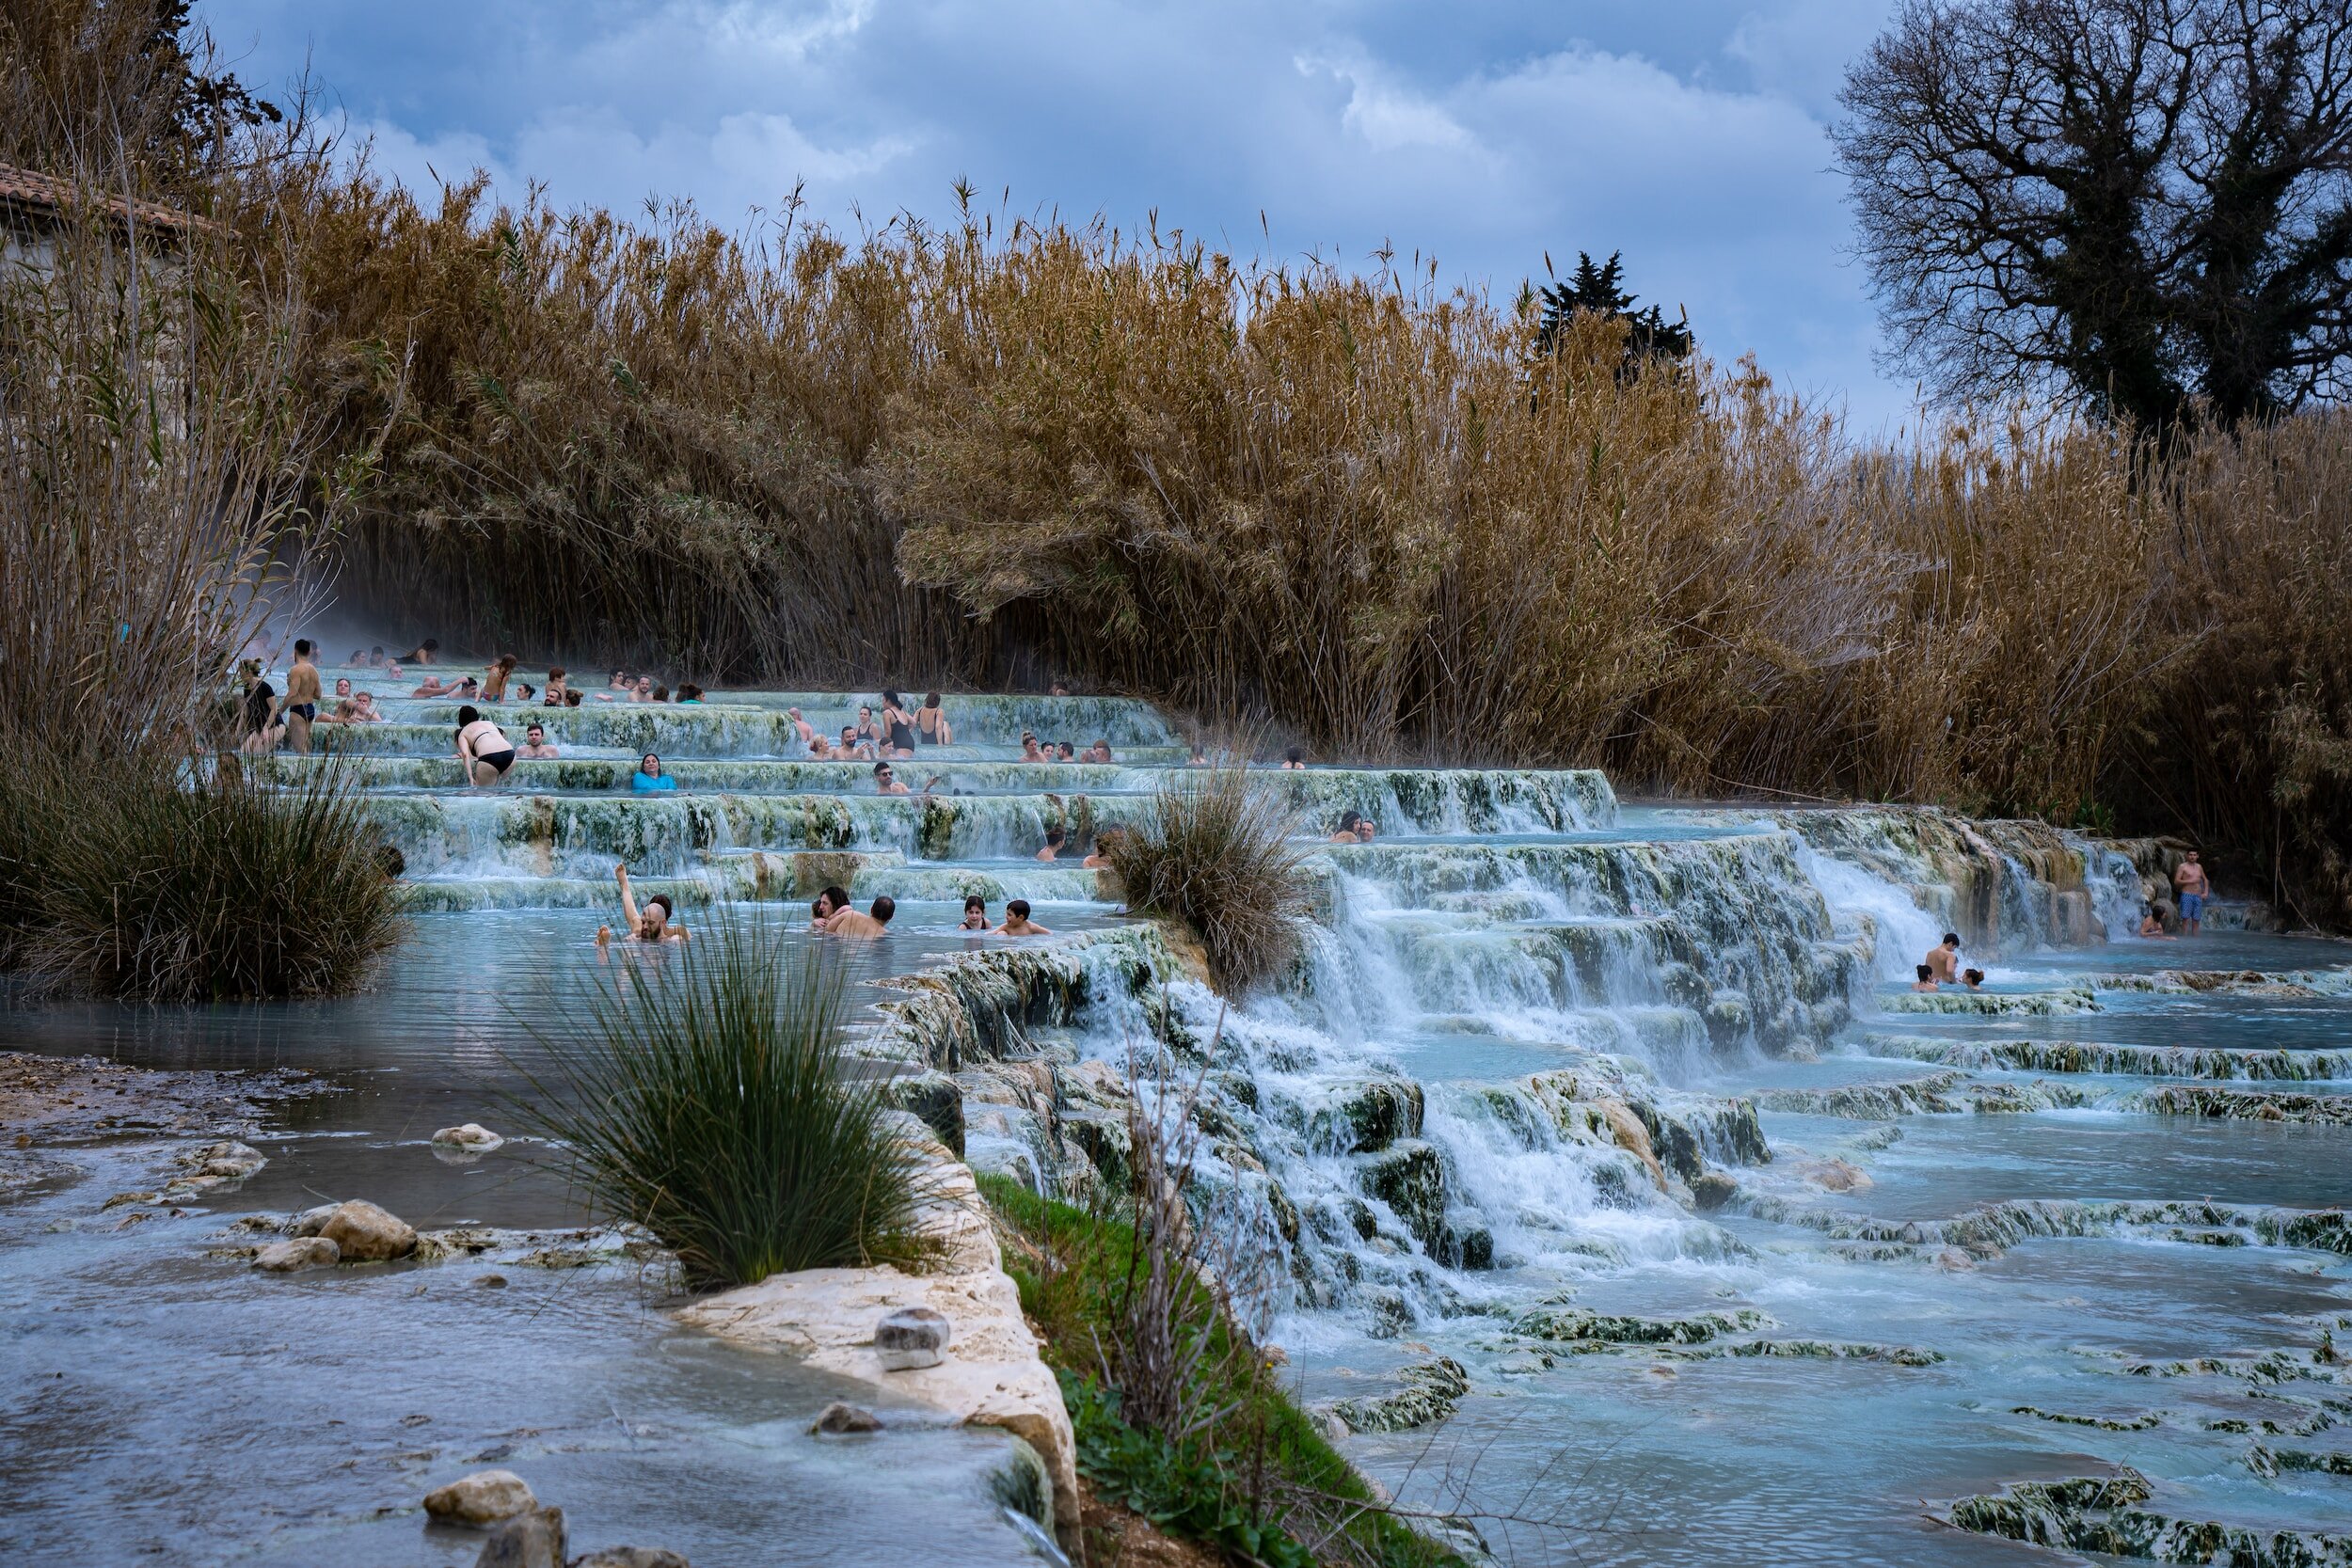 The cascading falls and hot spring pools filled with people in the Terme di Saturnia